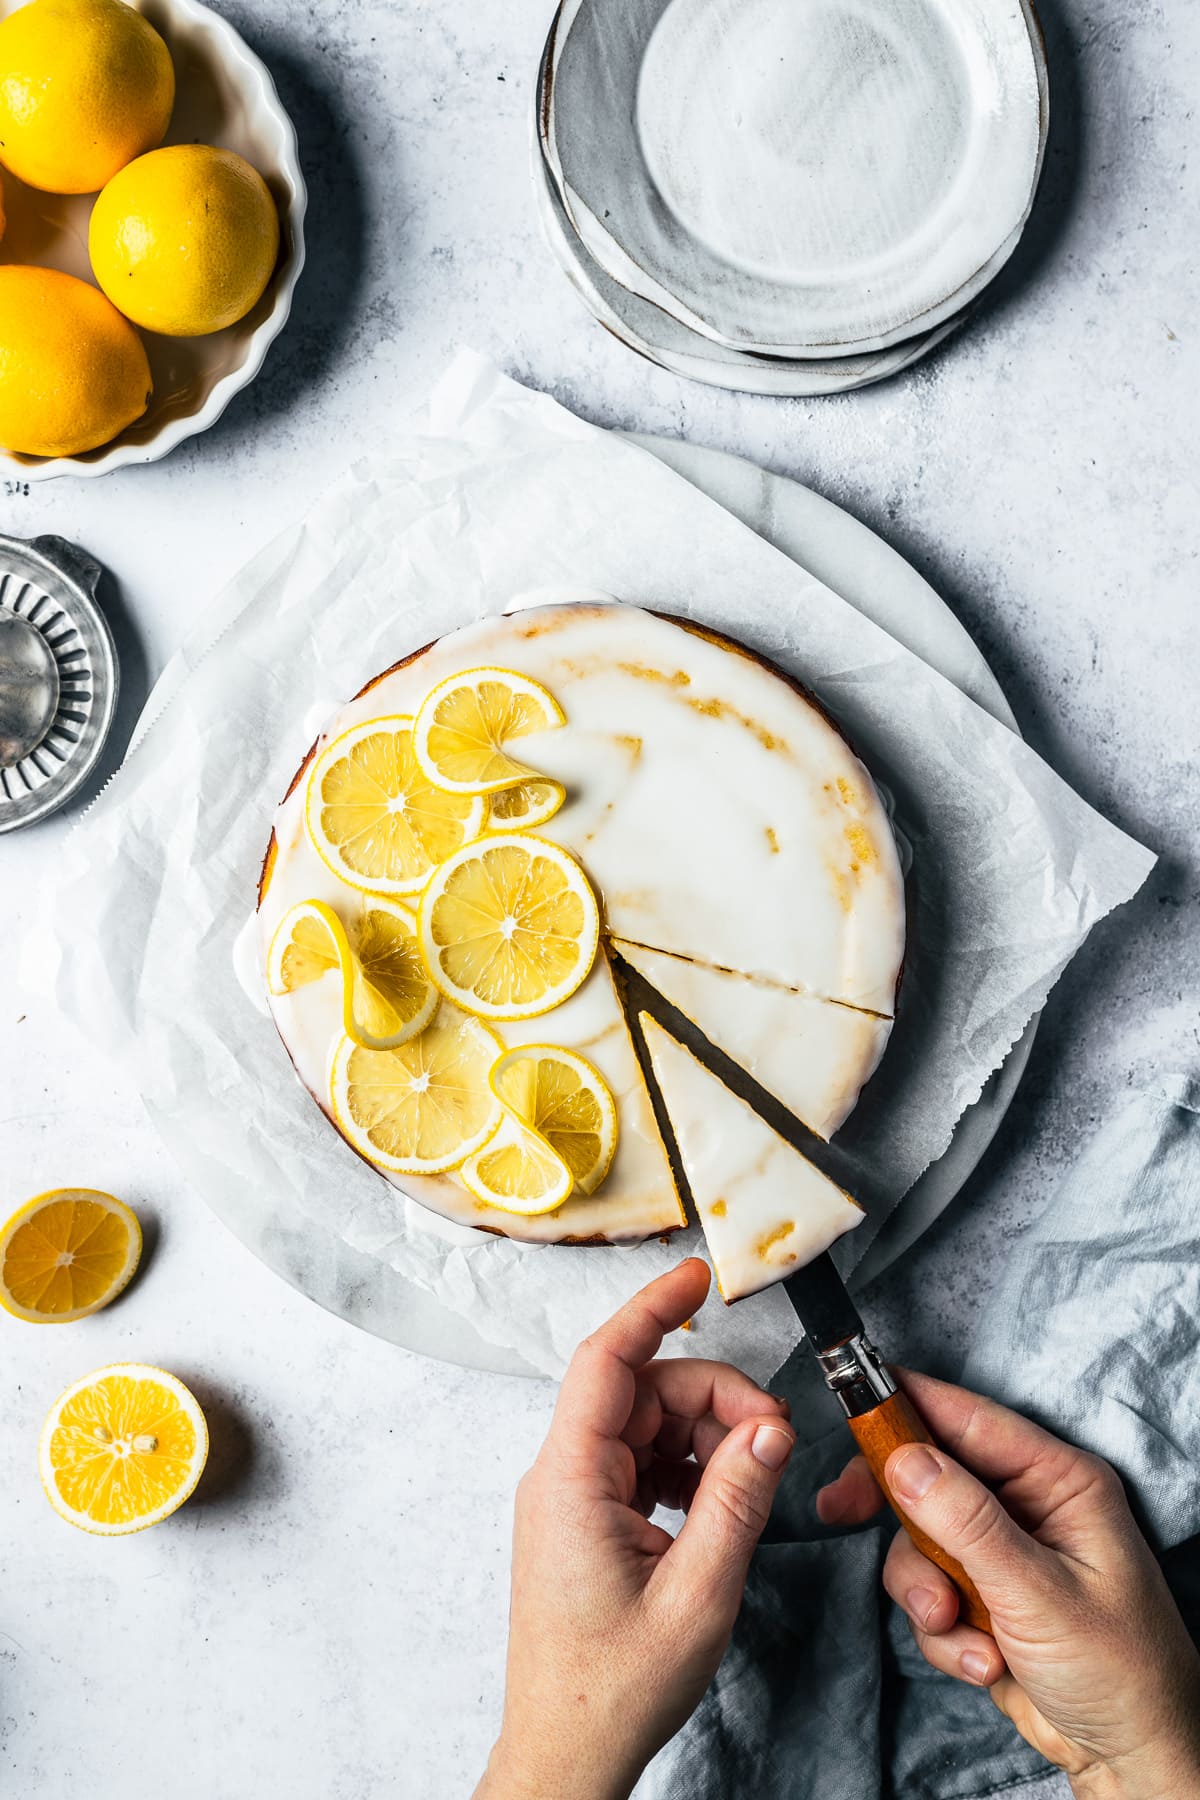 Hands lift a slice of lemon cake from a marble platter. Ceramic plates, lemons, and a juicer surround the cake on a light blue concrete background.